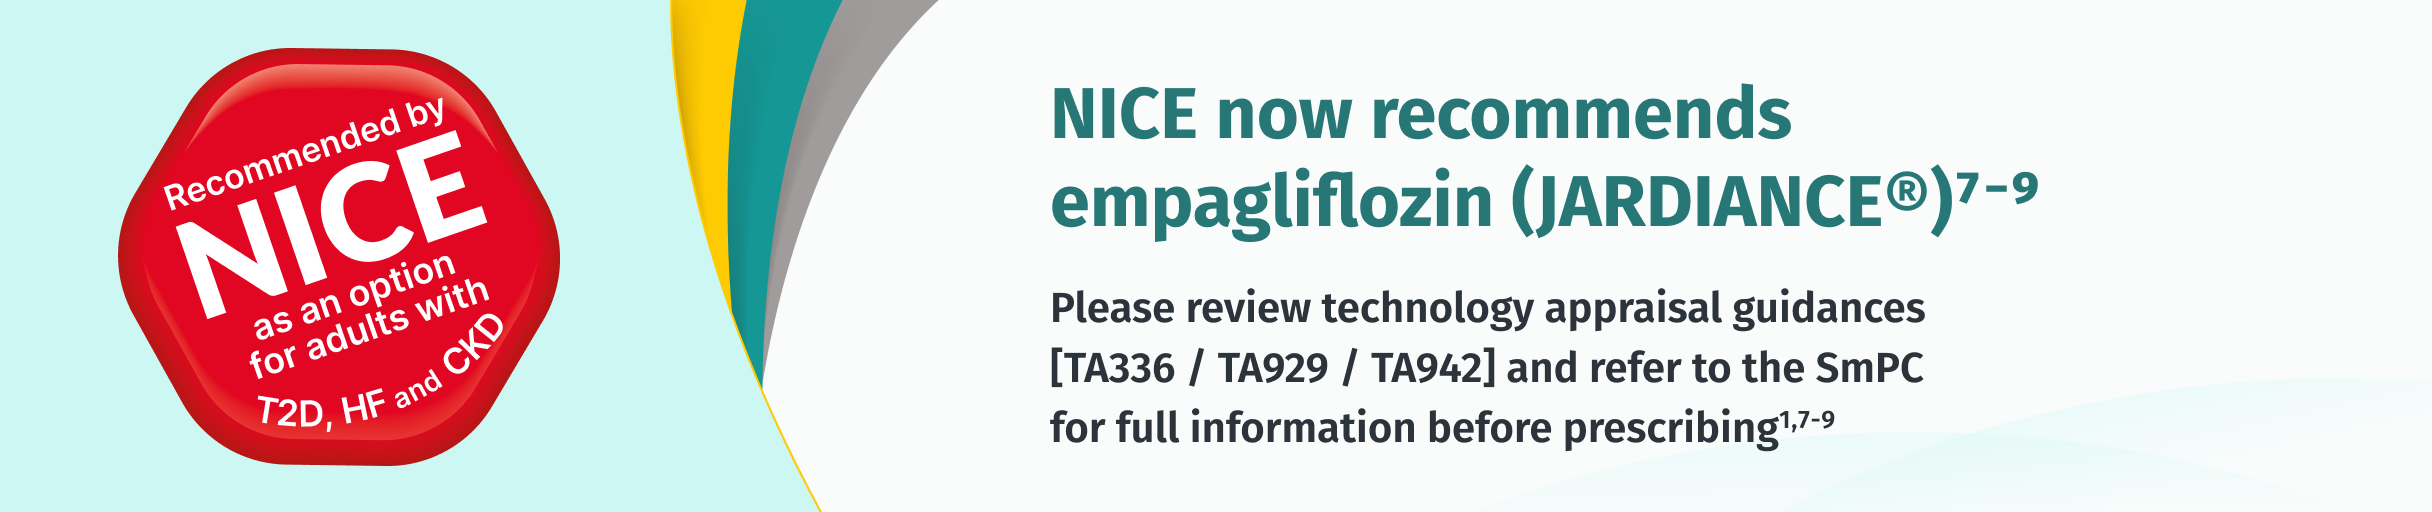 NICE now recommends empagliflozin (JARDIANCE®) banner